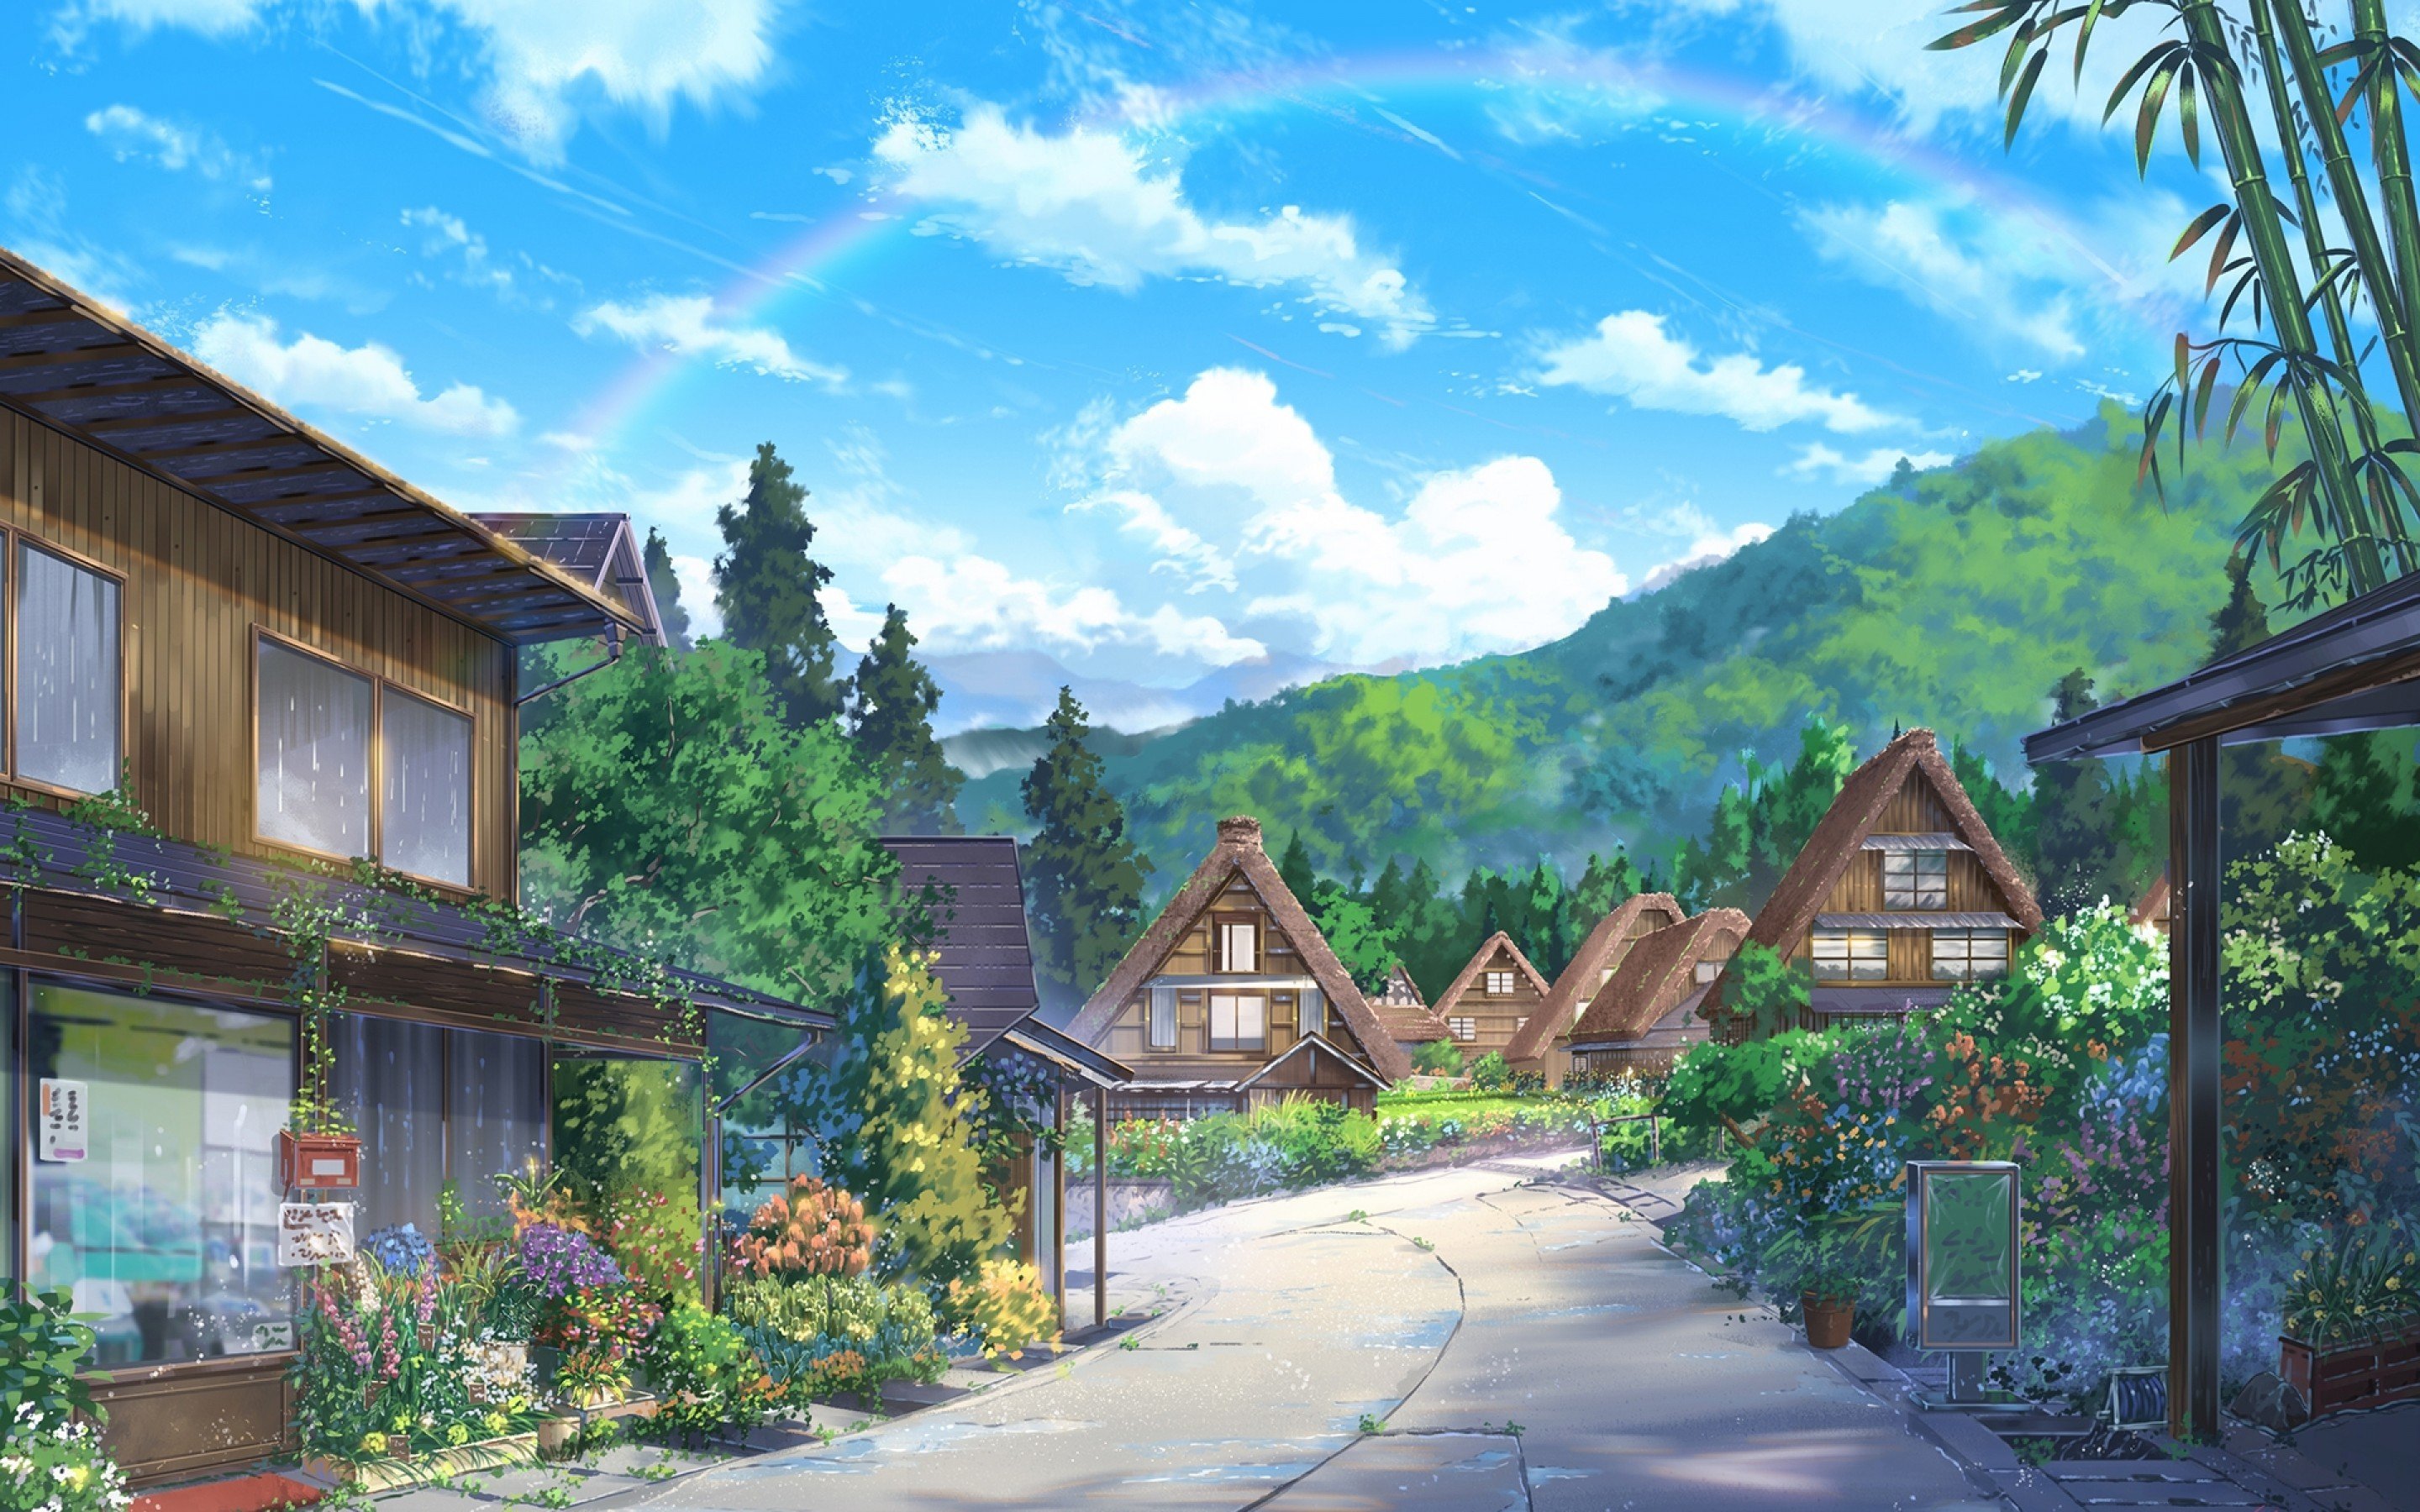 Download 2880x1800 Anime Landscape, Houses, Scenic, Clouds